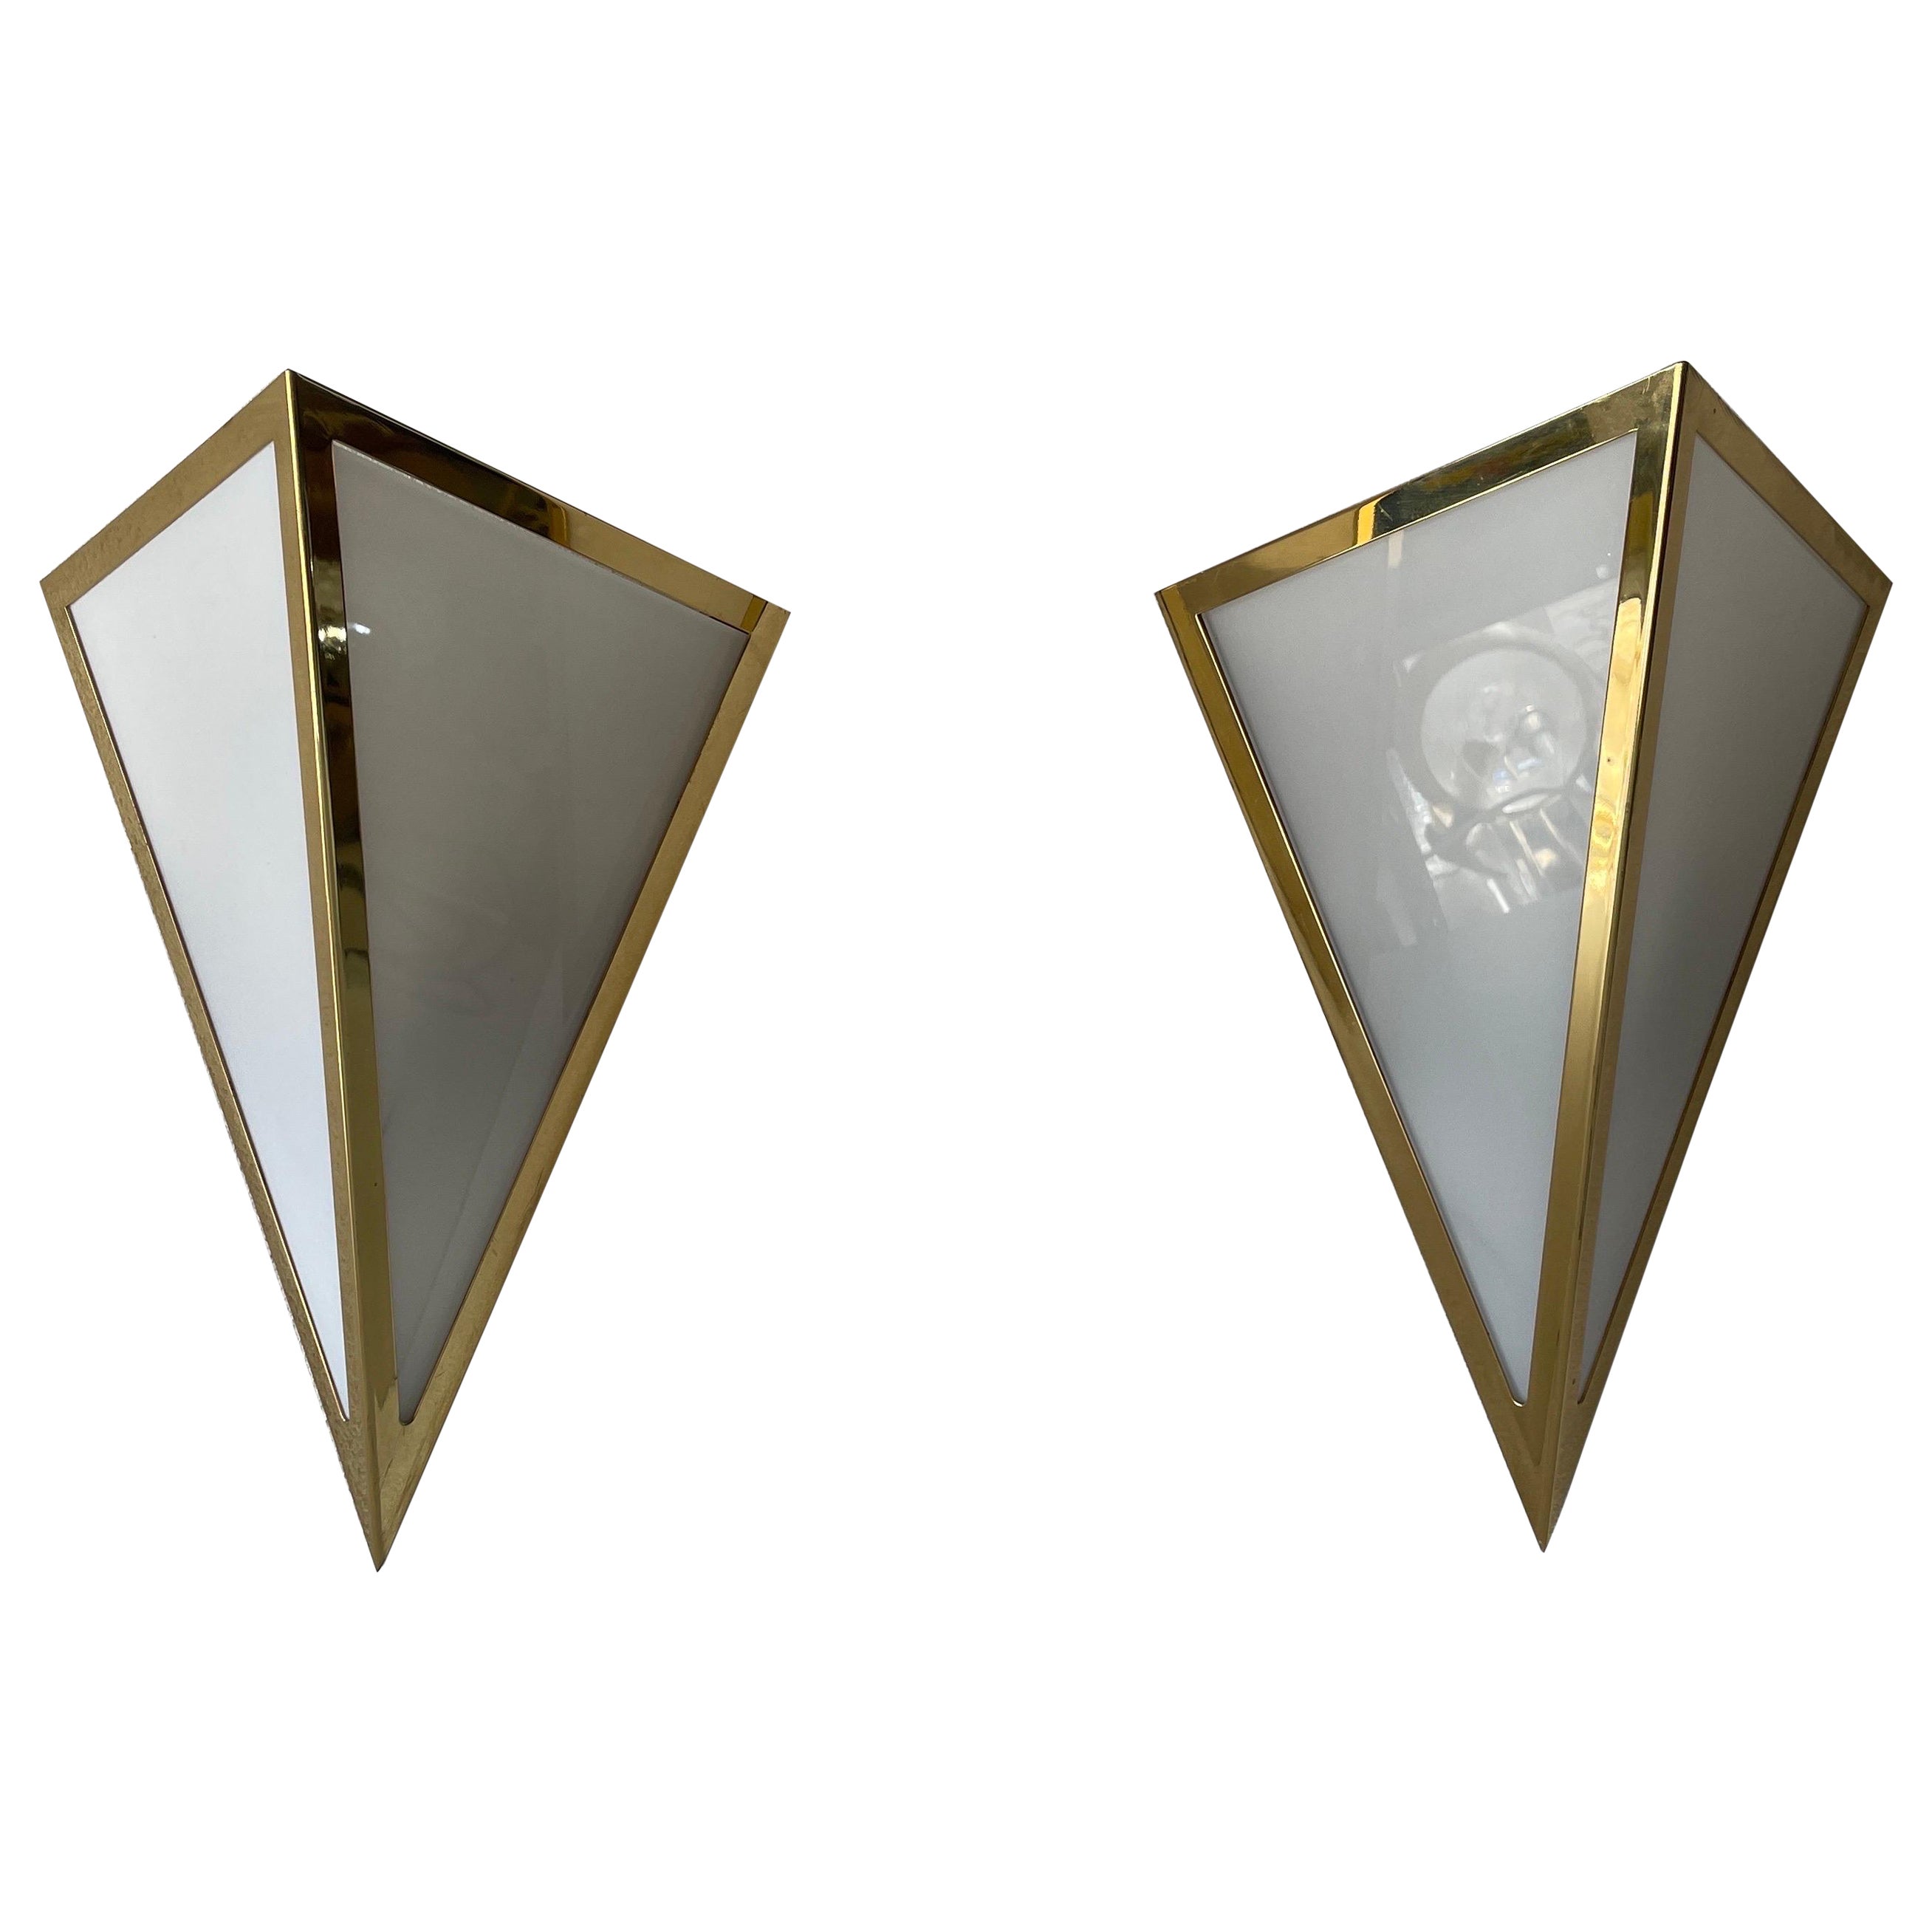 Triangle Design Opal Glass and Gold Metal Pair of Sconces by WKR, 1970s, Germany For Sale